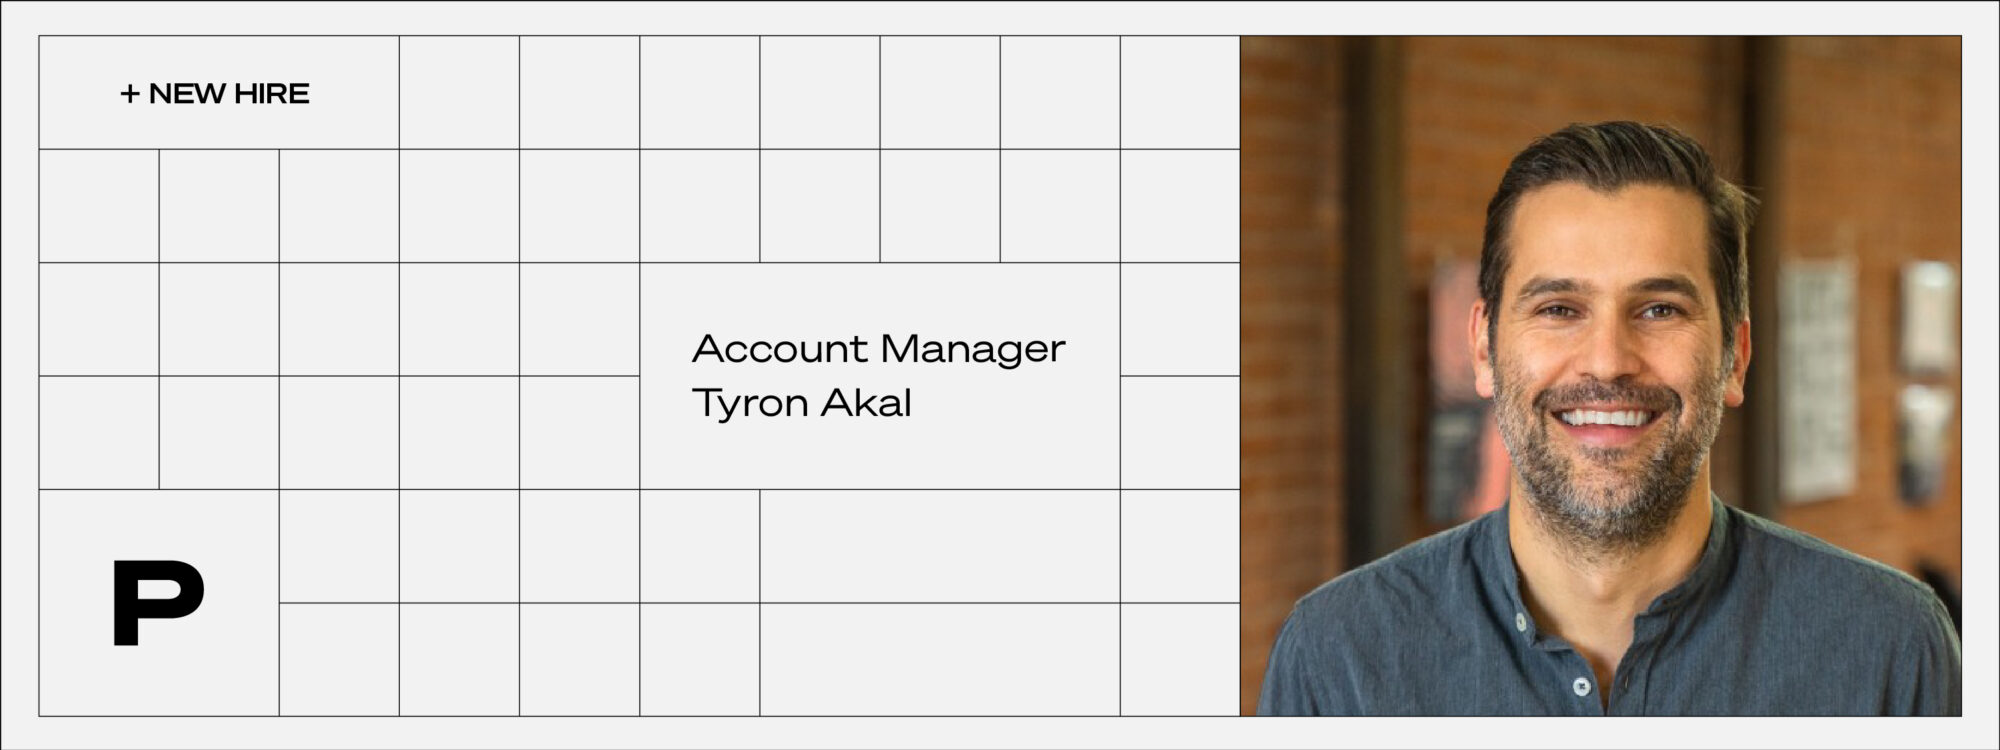 Brown hair man with a smile. Account Manager - Tyron Akal